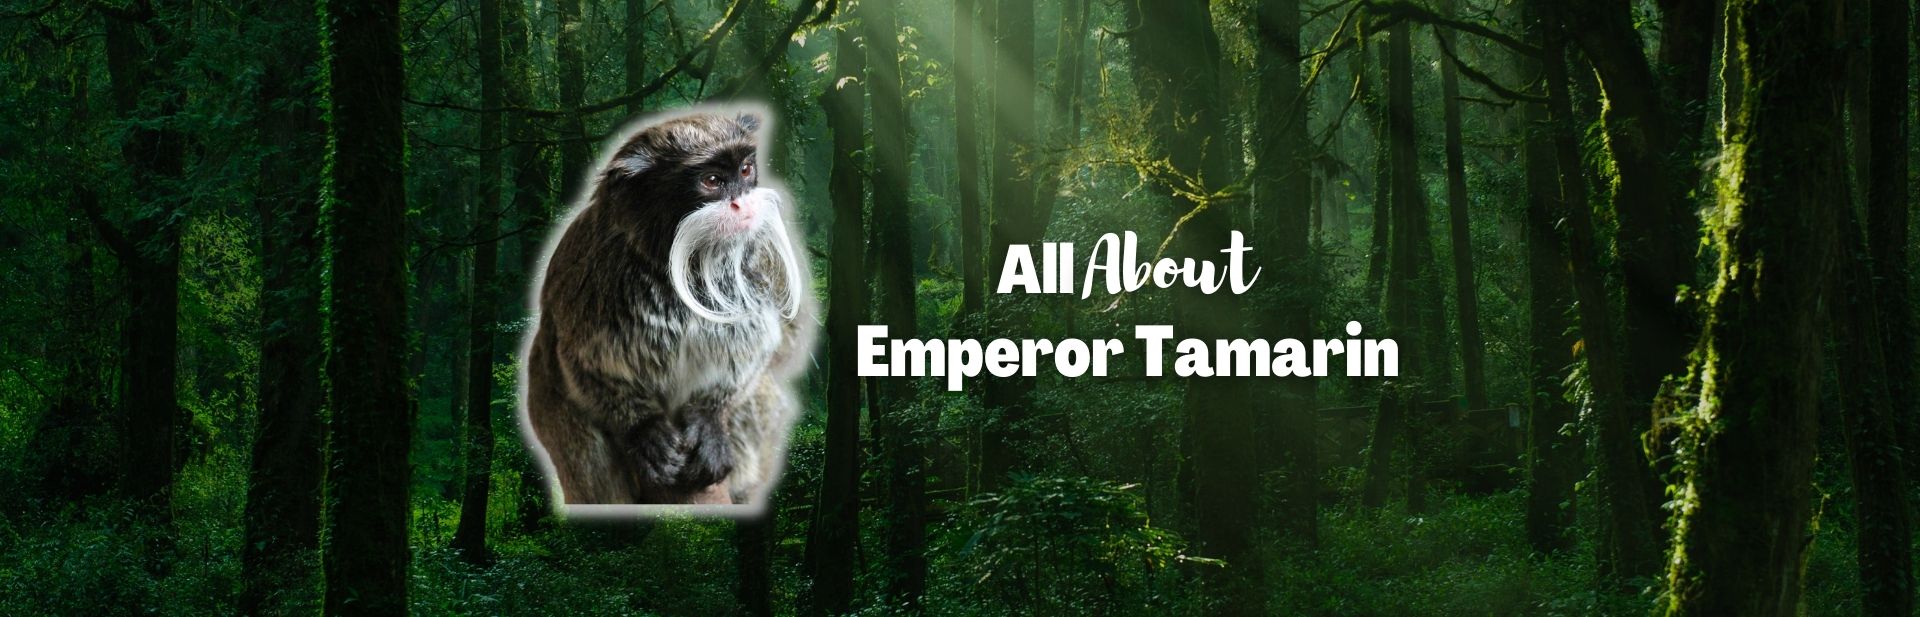 Emperor Tamarin: The Mustached Monkeys of the Amazon